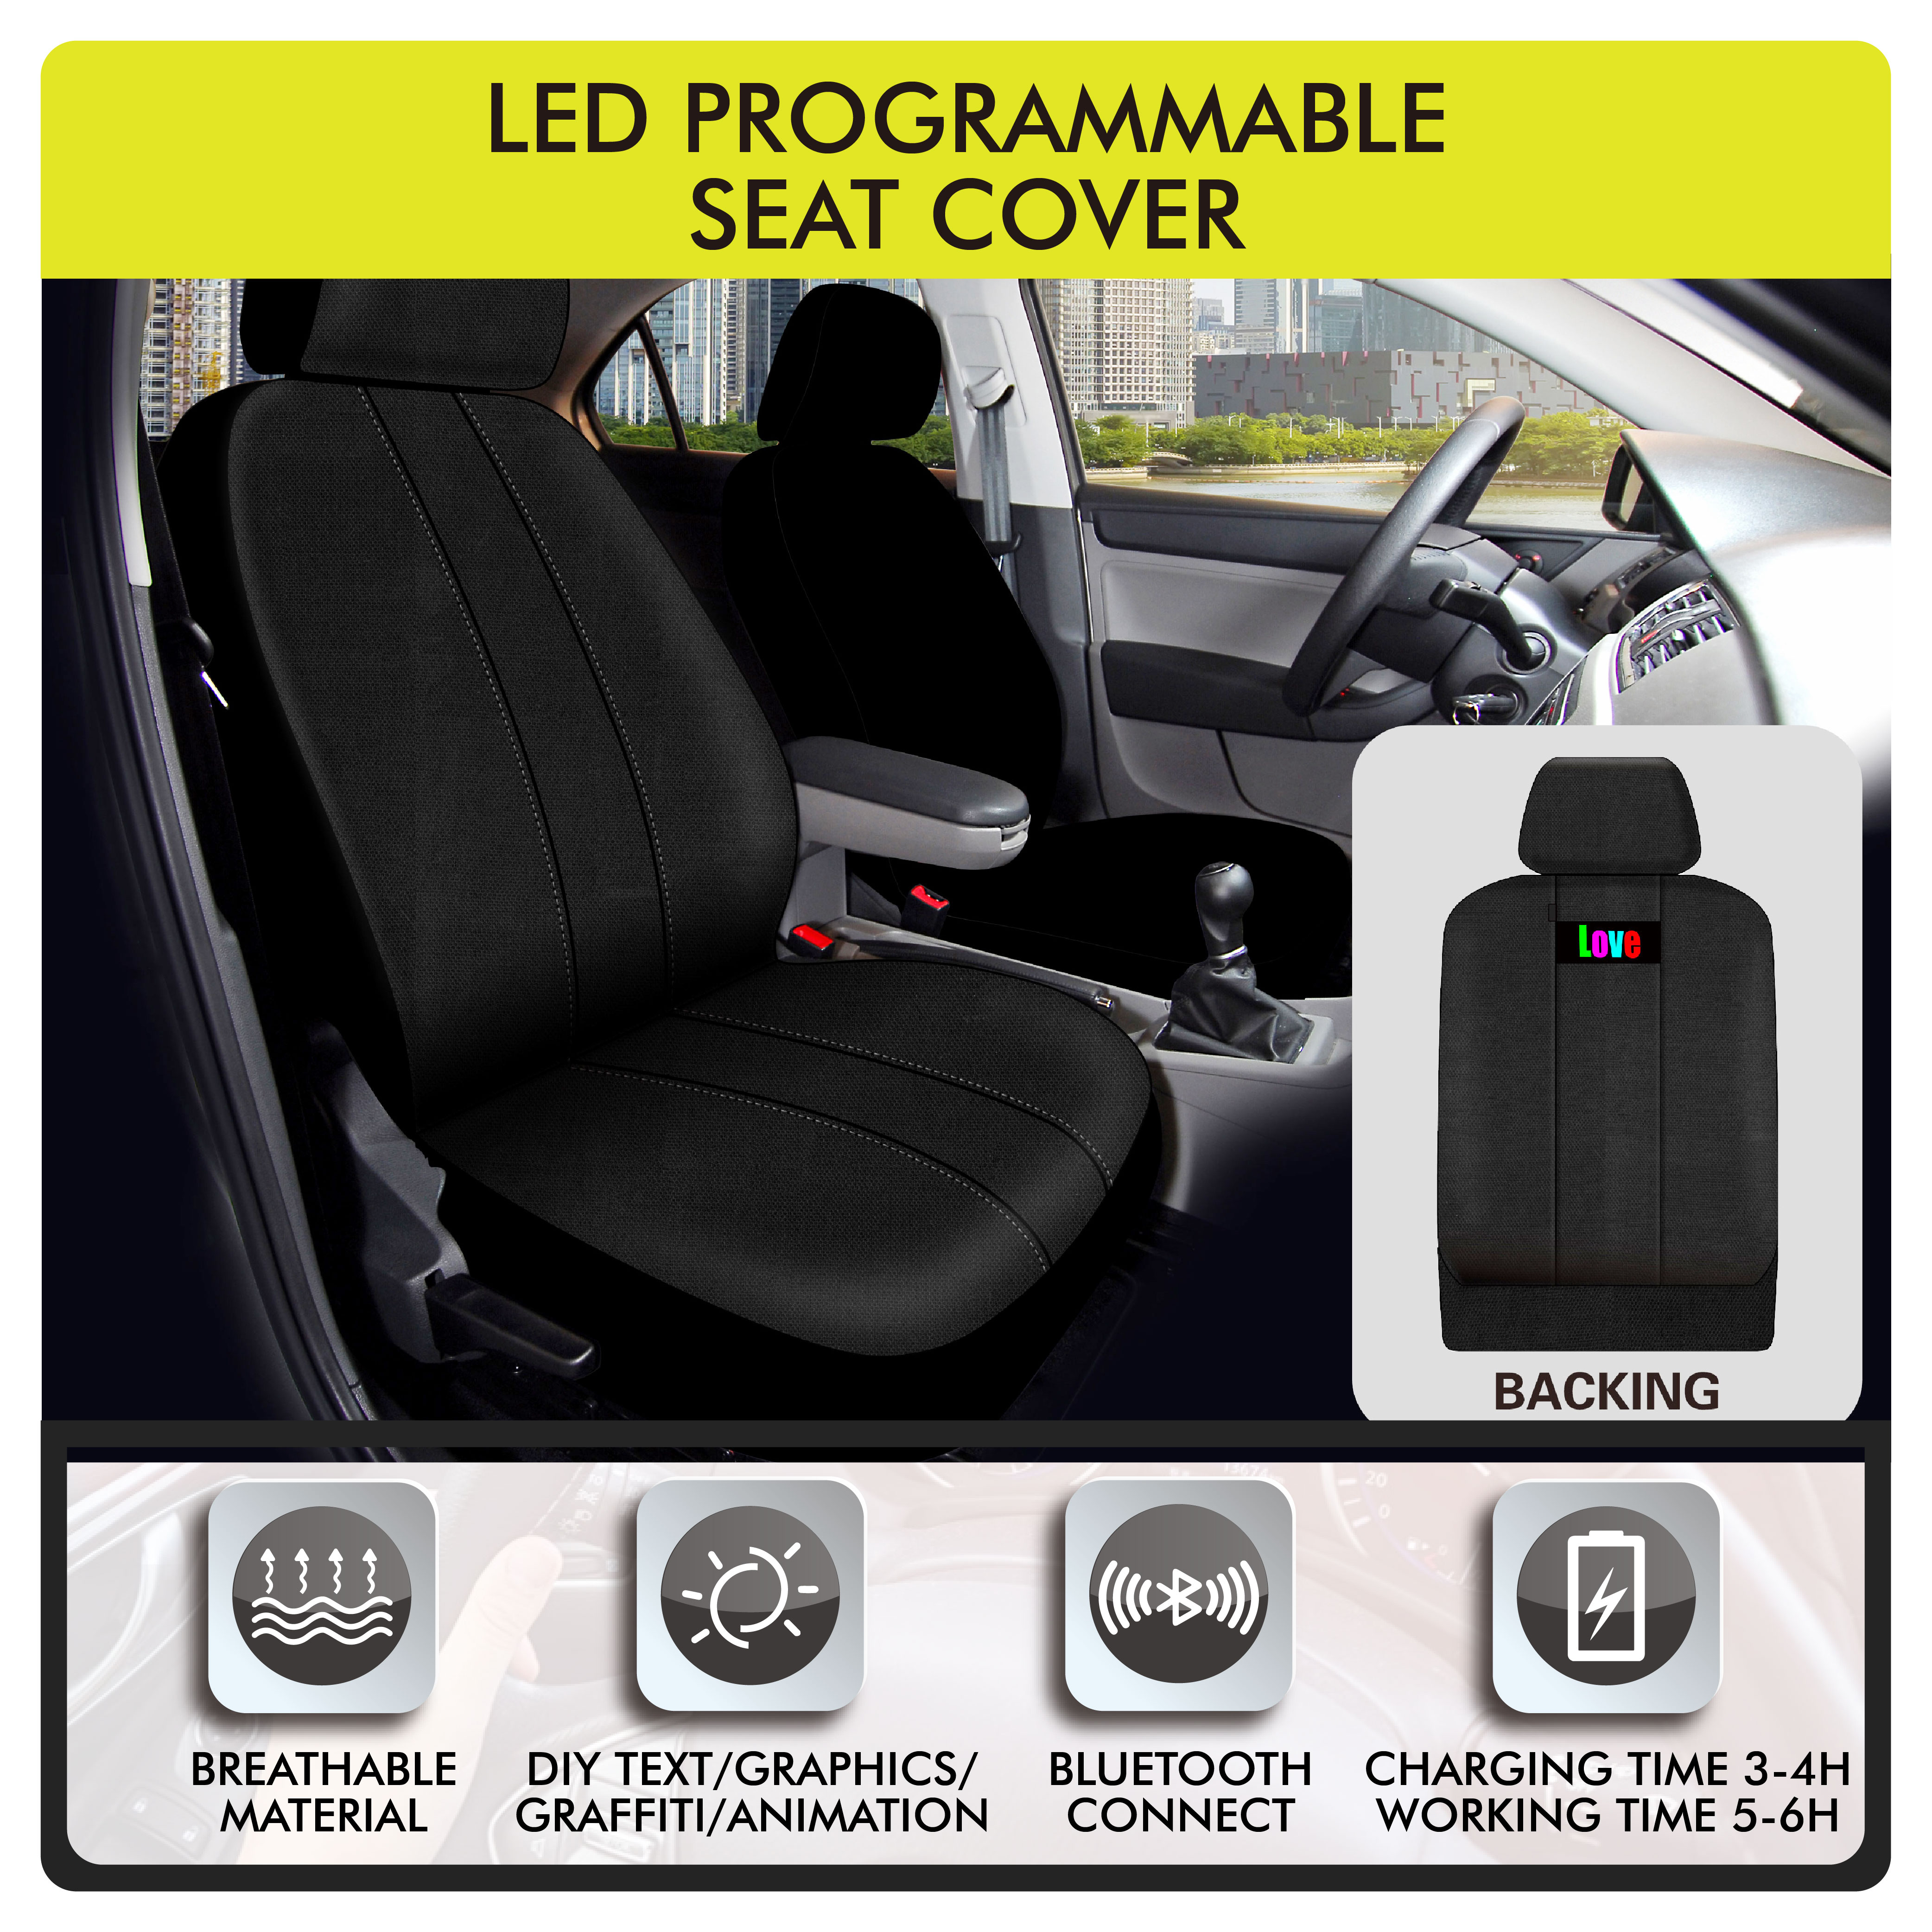 Auto Drive LED Programmable Car Seat Cover, Black, Fits Most Vehicle Seats 